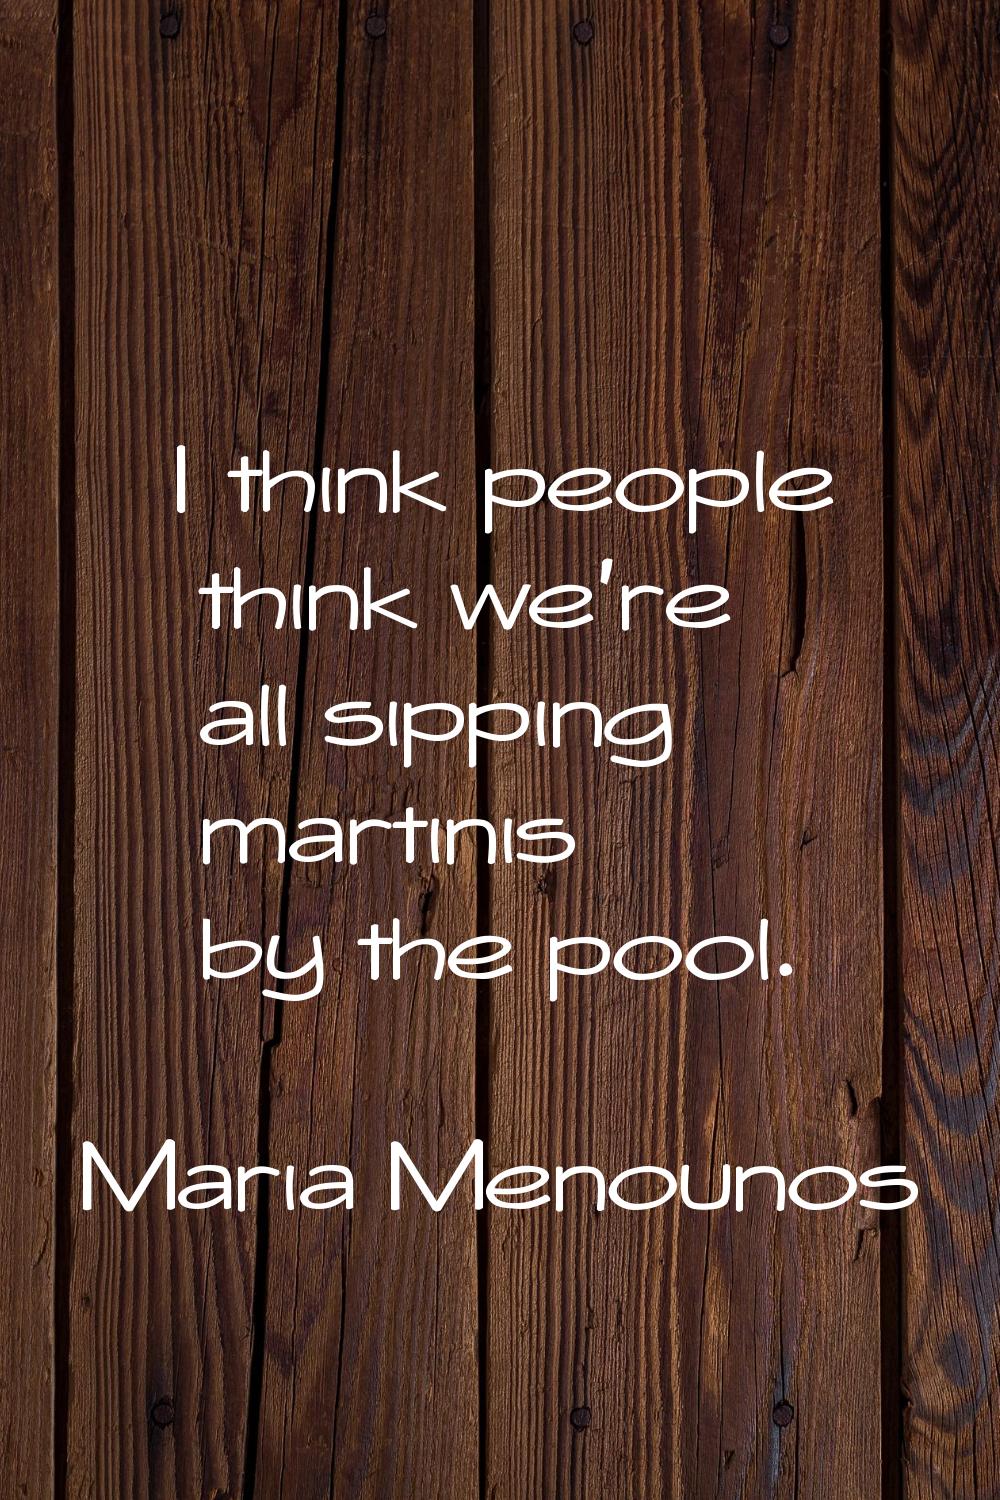 I think people think we're all sipping martinis by the pool.